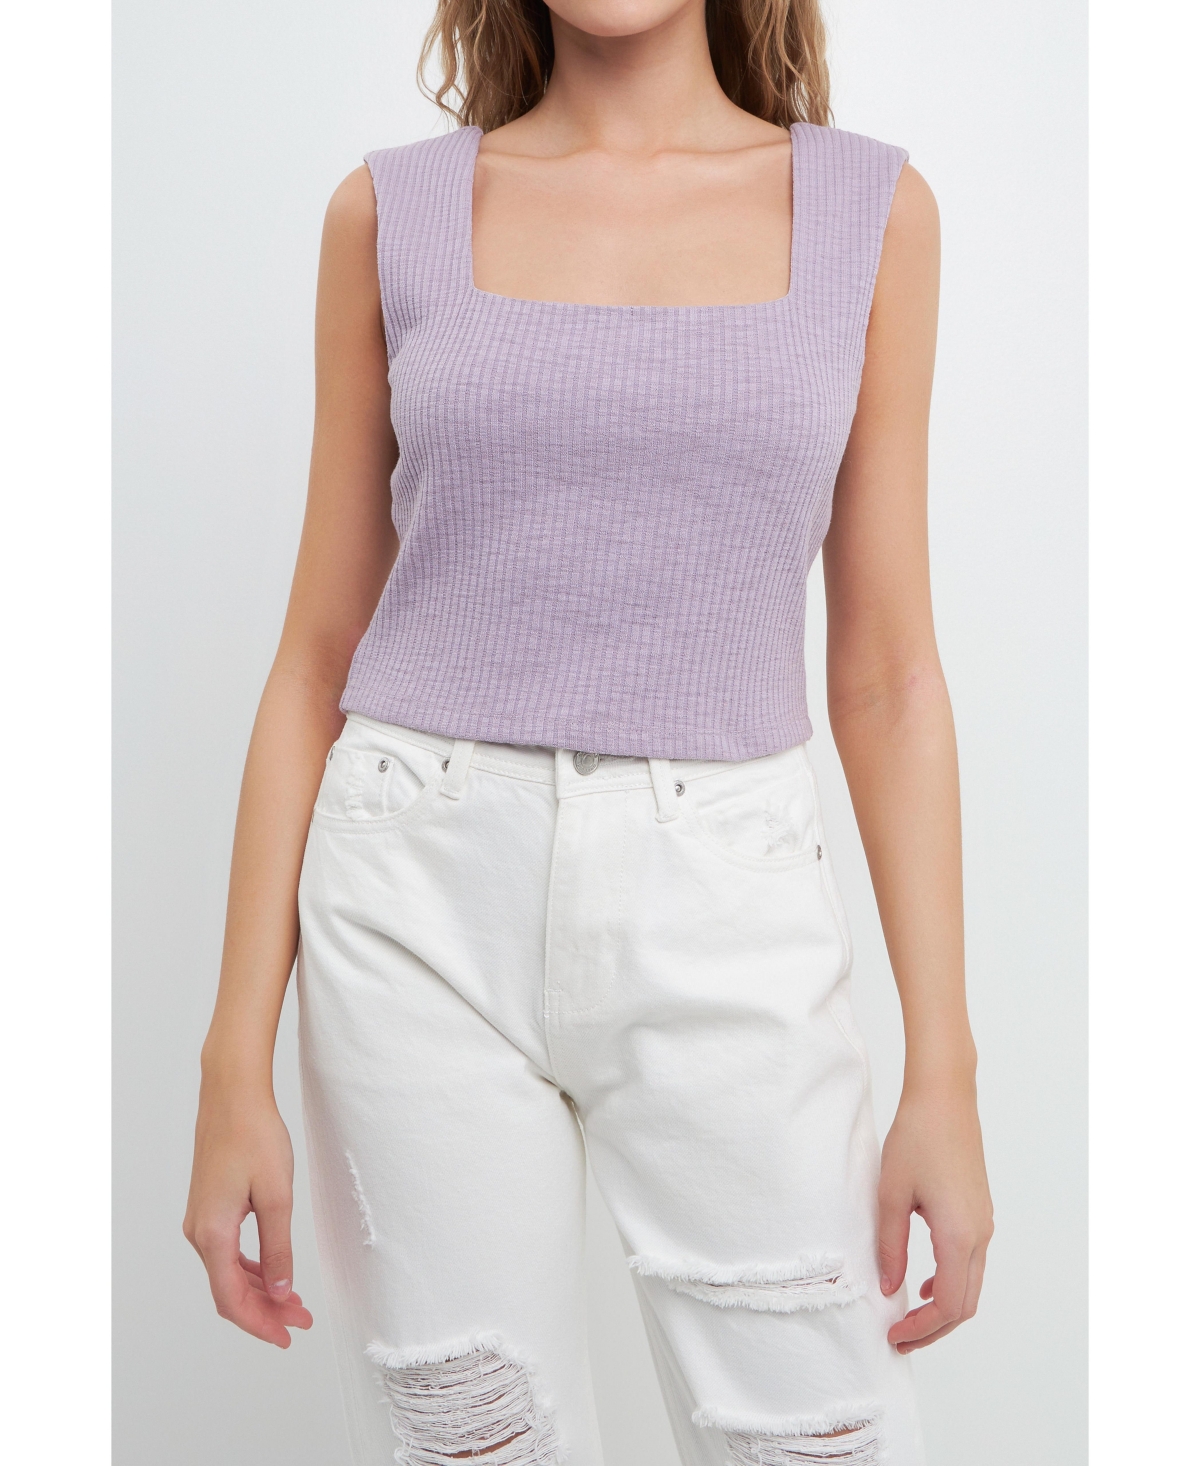 Women's Fitted Knit Cropped Tank Top - Purple